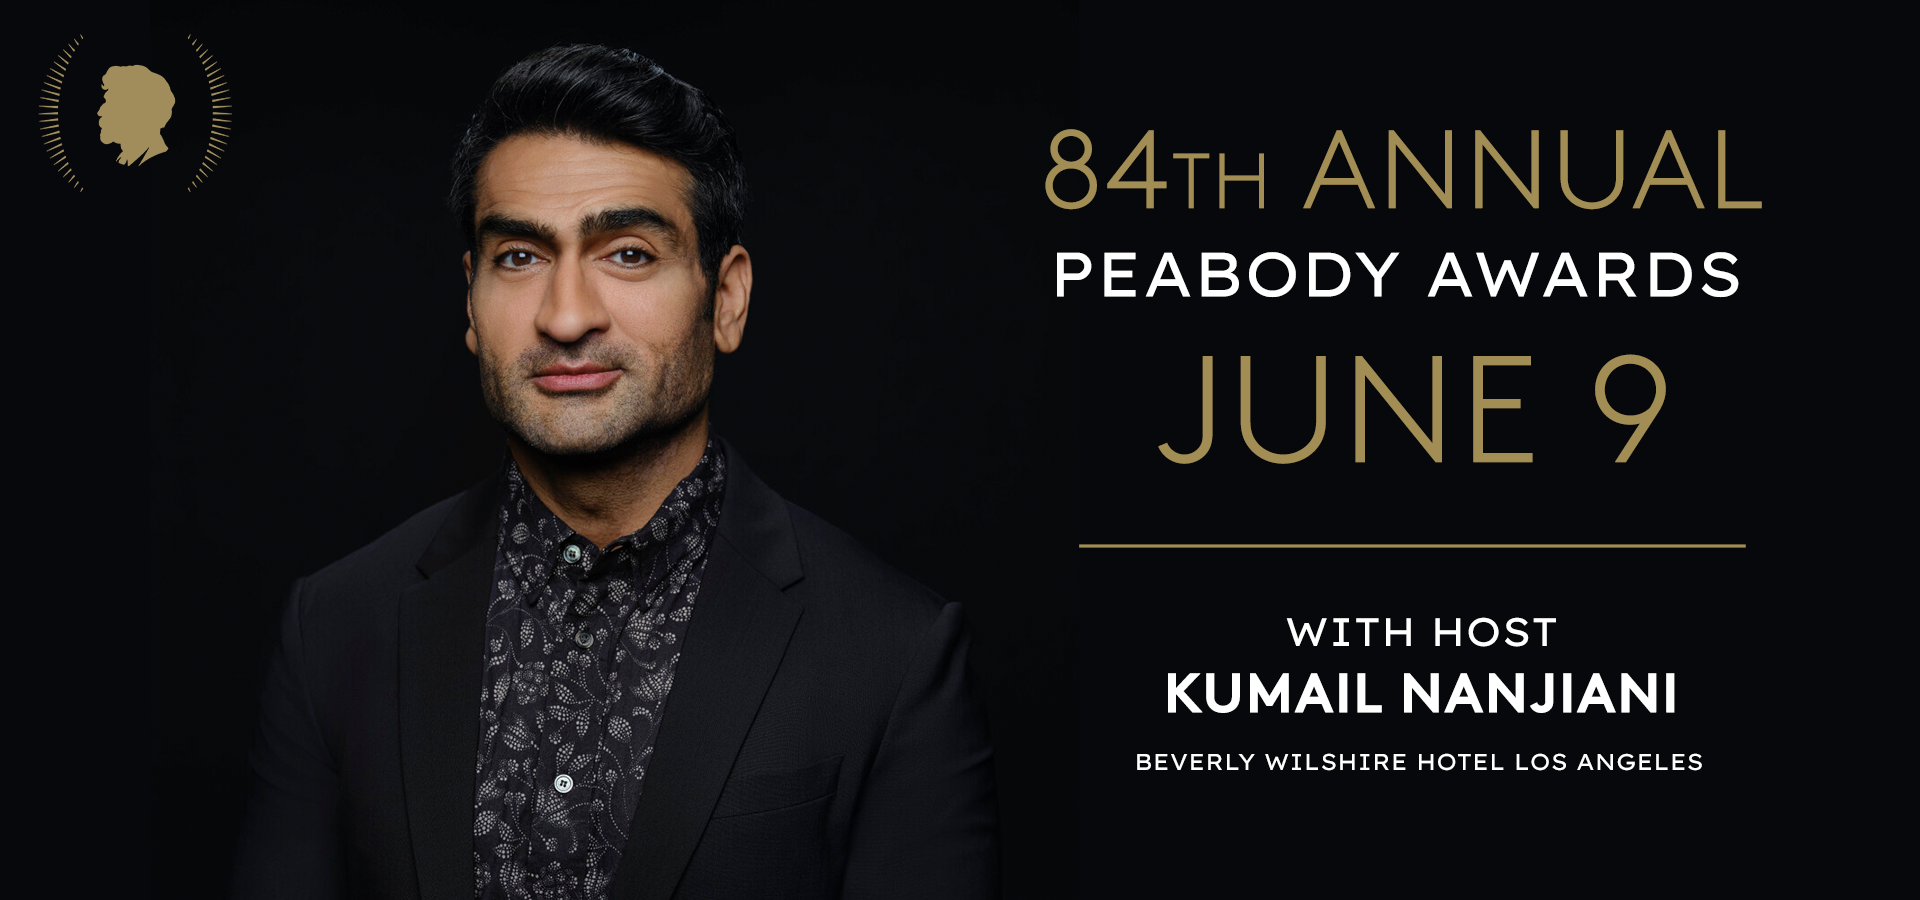 84th Annual Peabody Awards - June 9, hosted by Kumail Nanjiani